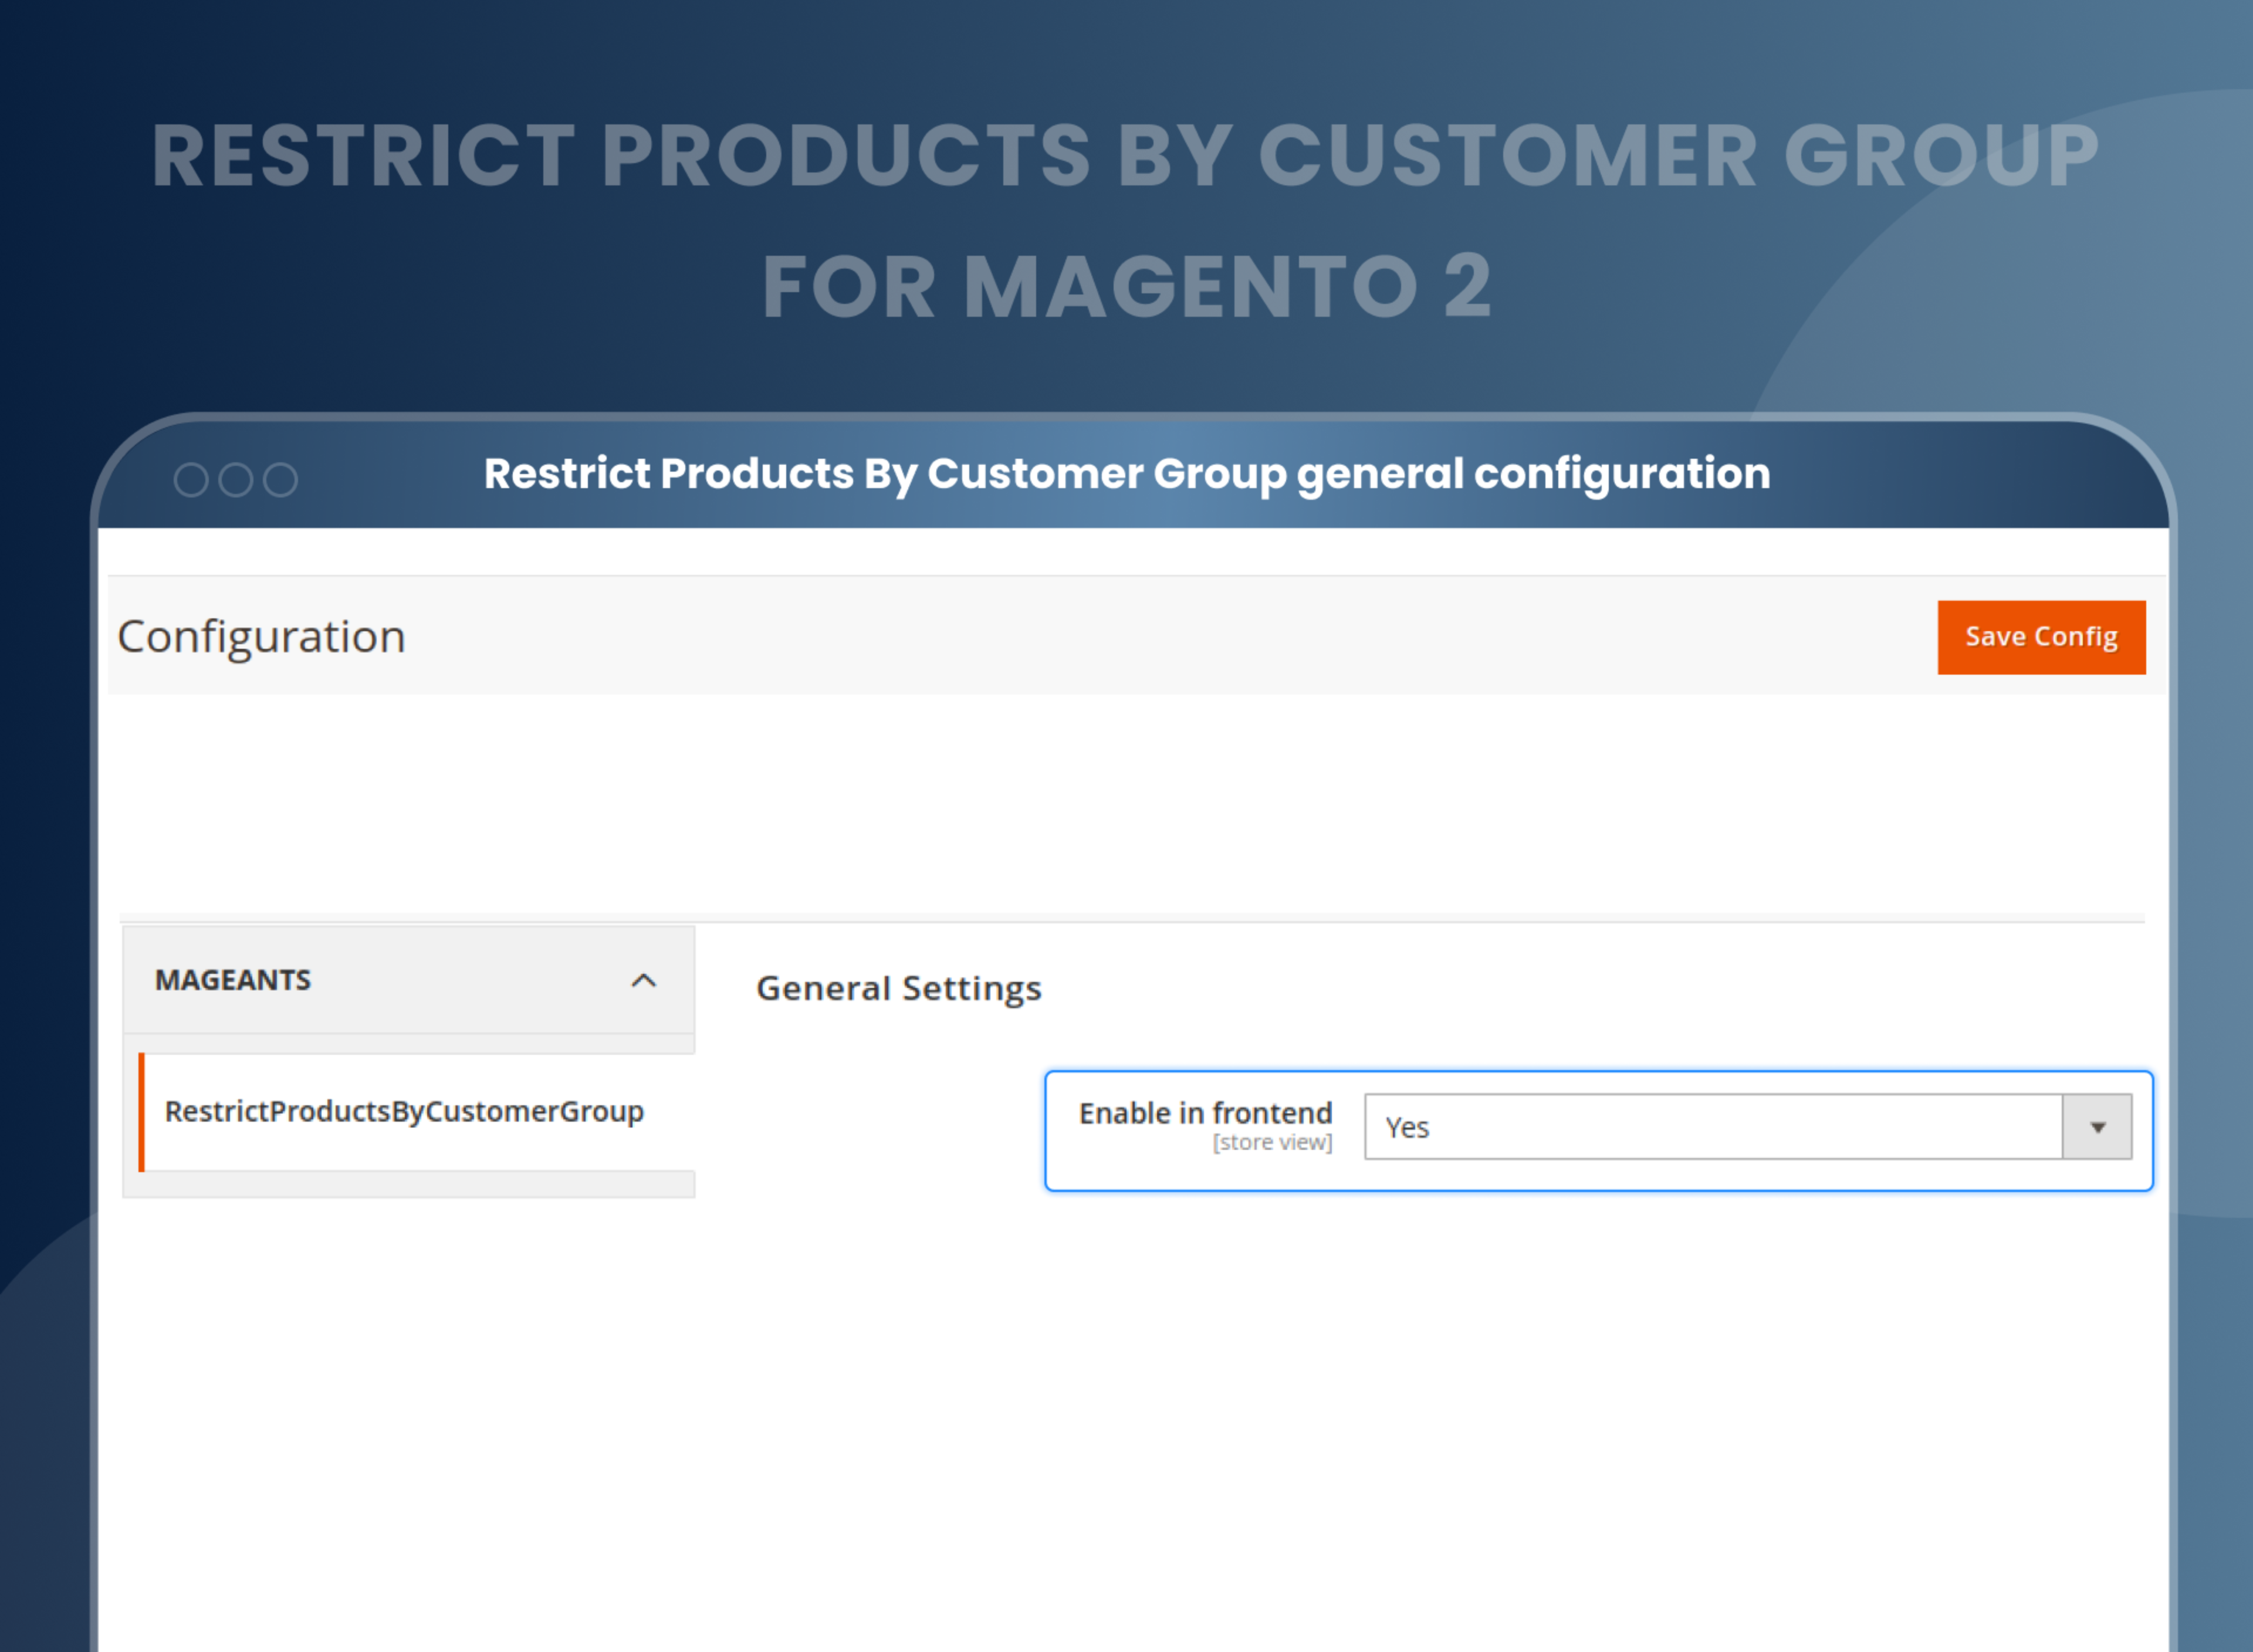 Restrict Products By Customer Group general configuration